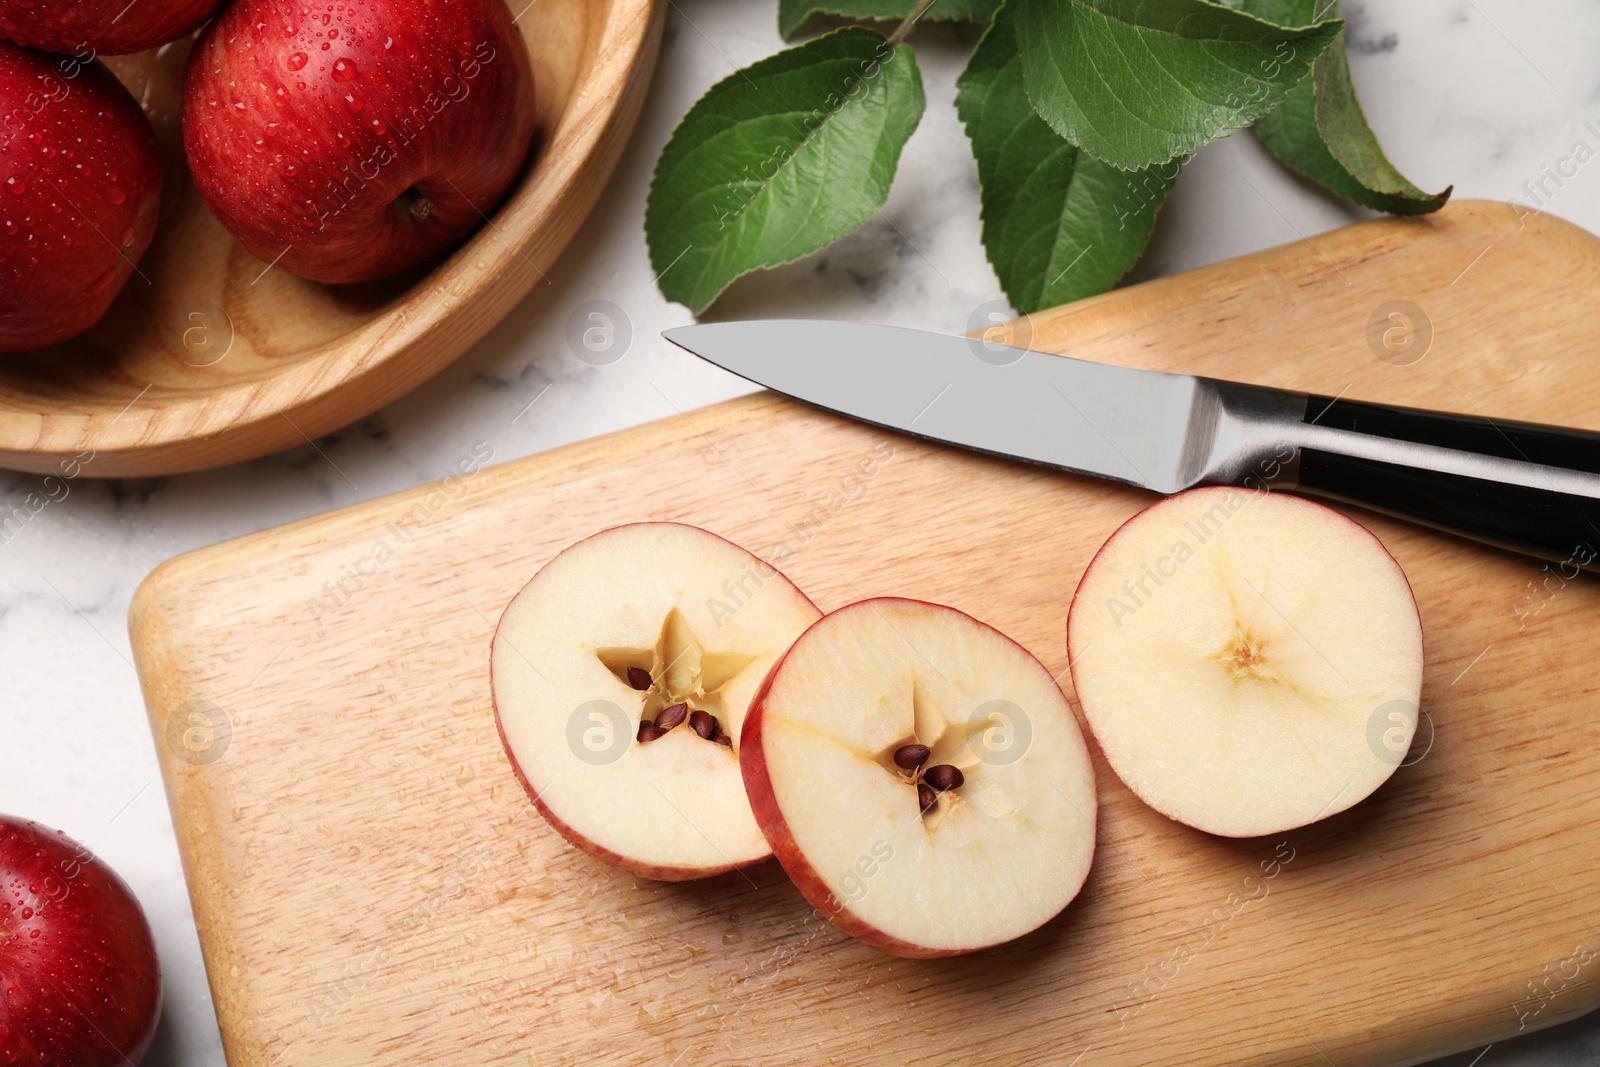 Photo of Cut red apple, knife and green leaves on white marble table, above view